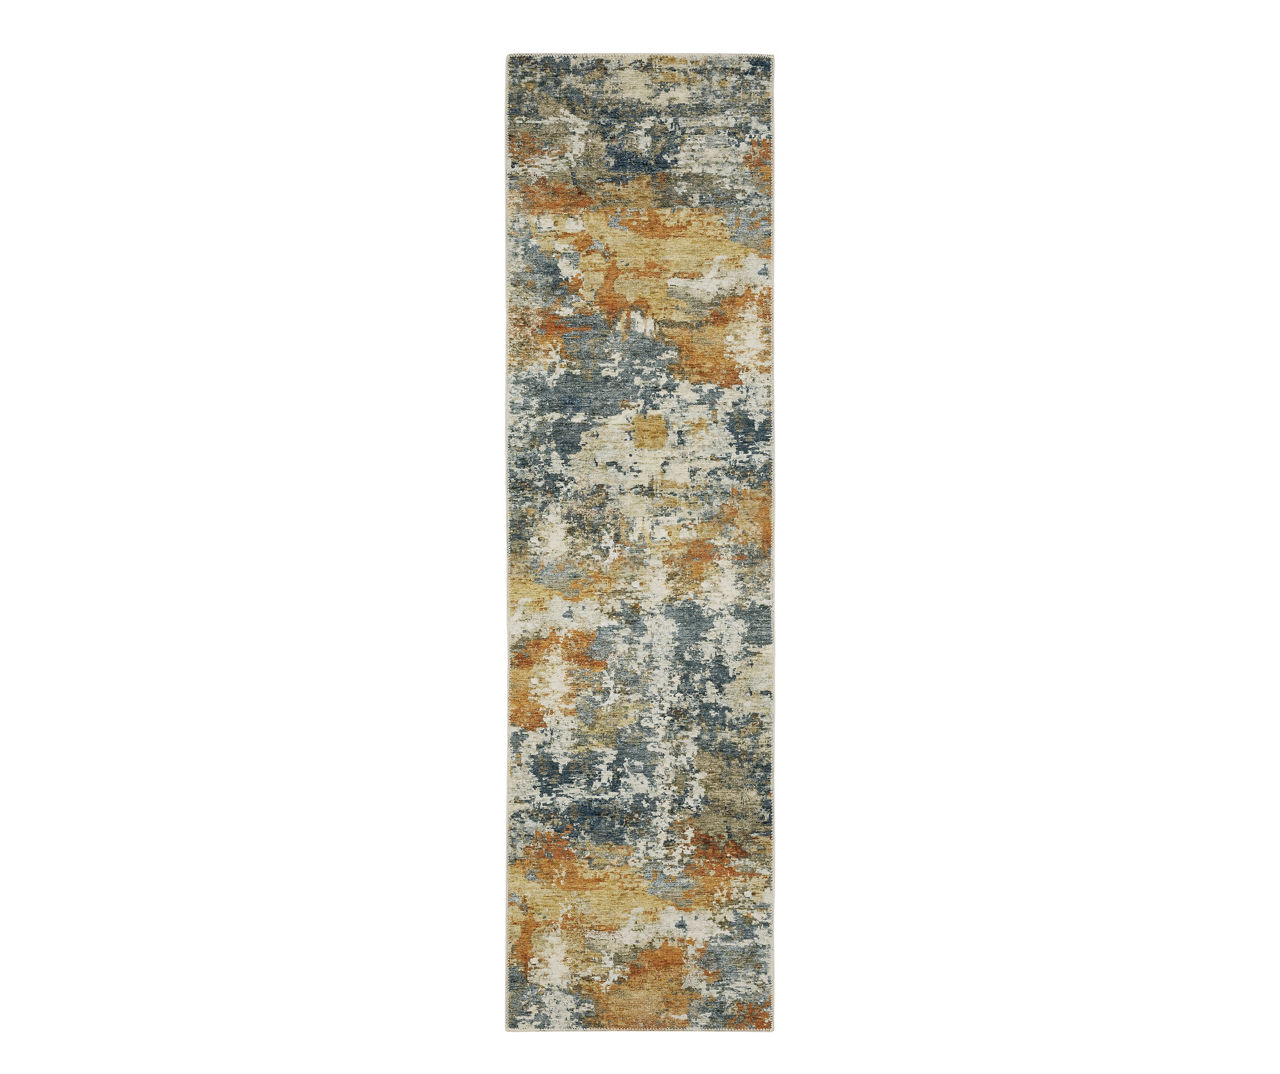 Malay Blue & Gold Abstract Area Rug, (2' x 8')